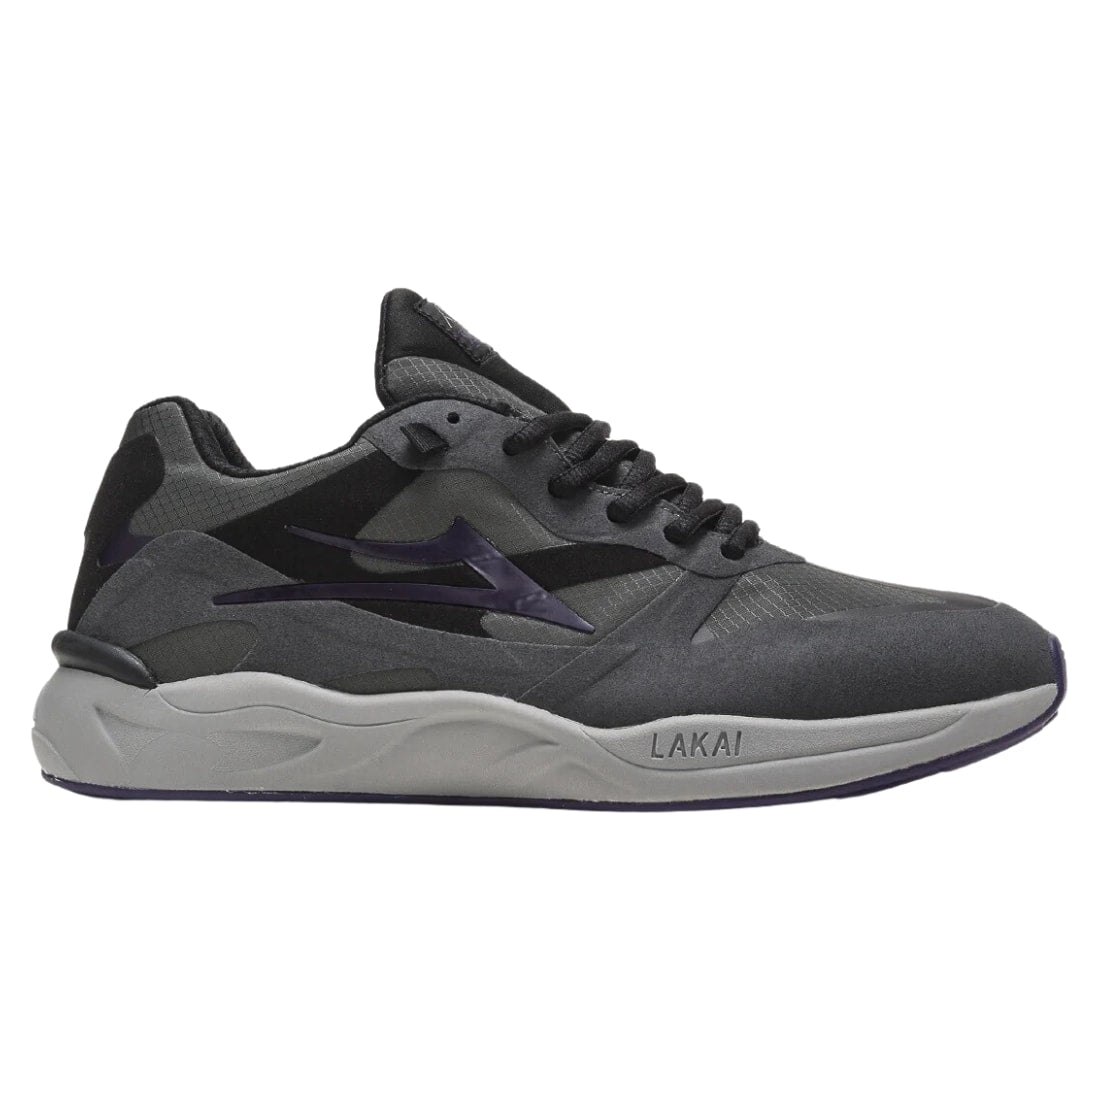 Lakai Evo 2.0 Weather Treated Shoes - Grey Suede - Mens Running Shoes/Trainers by Lakai